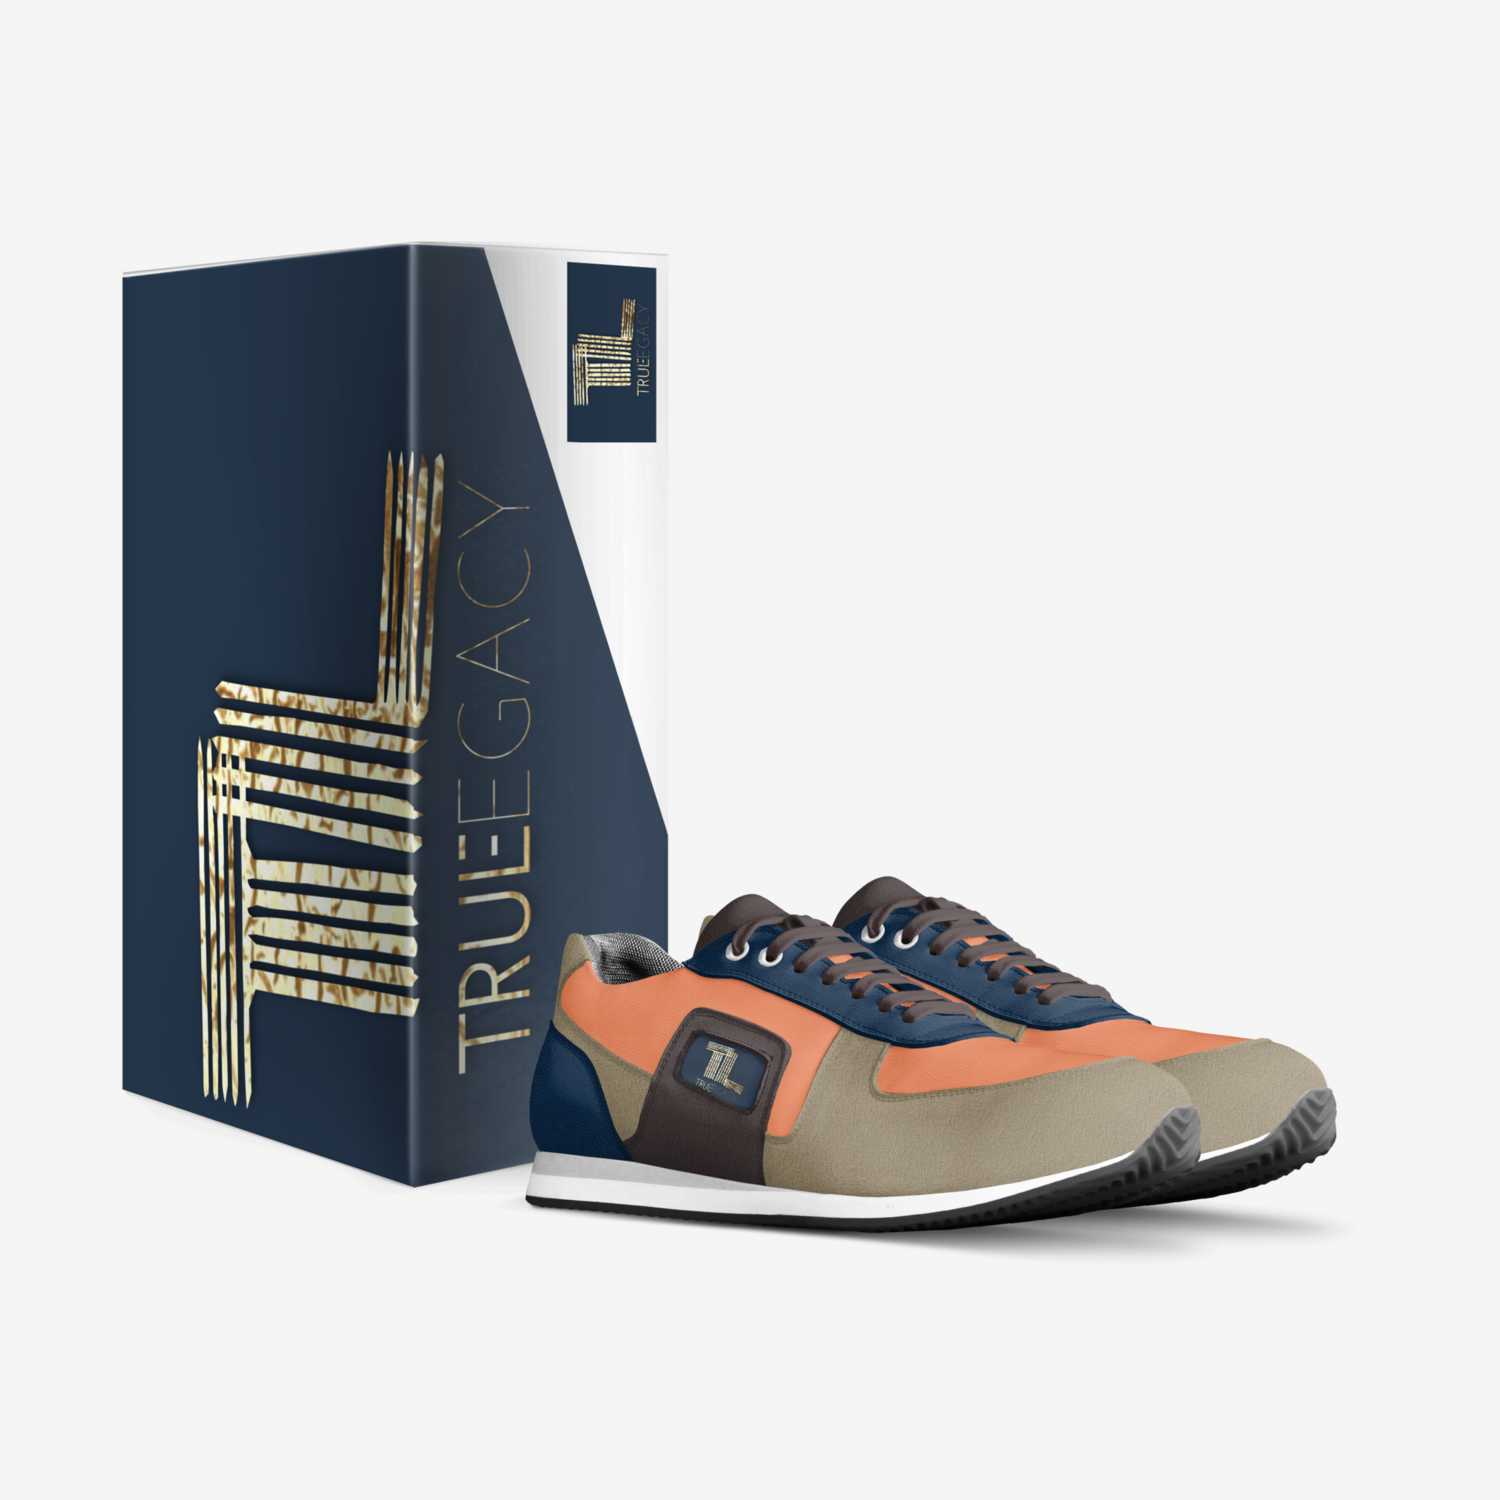 LEGACY77 custom made in Italy shoes by Rodrick Perkins | Box view